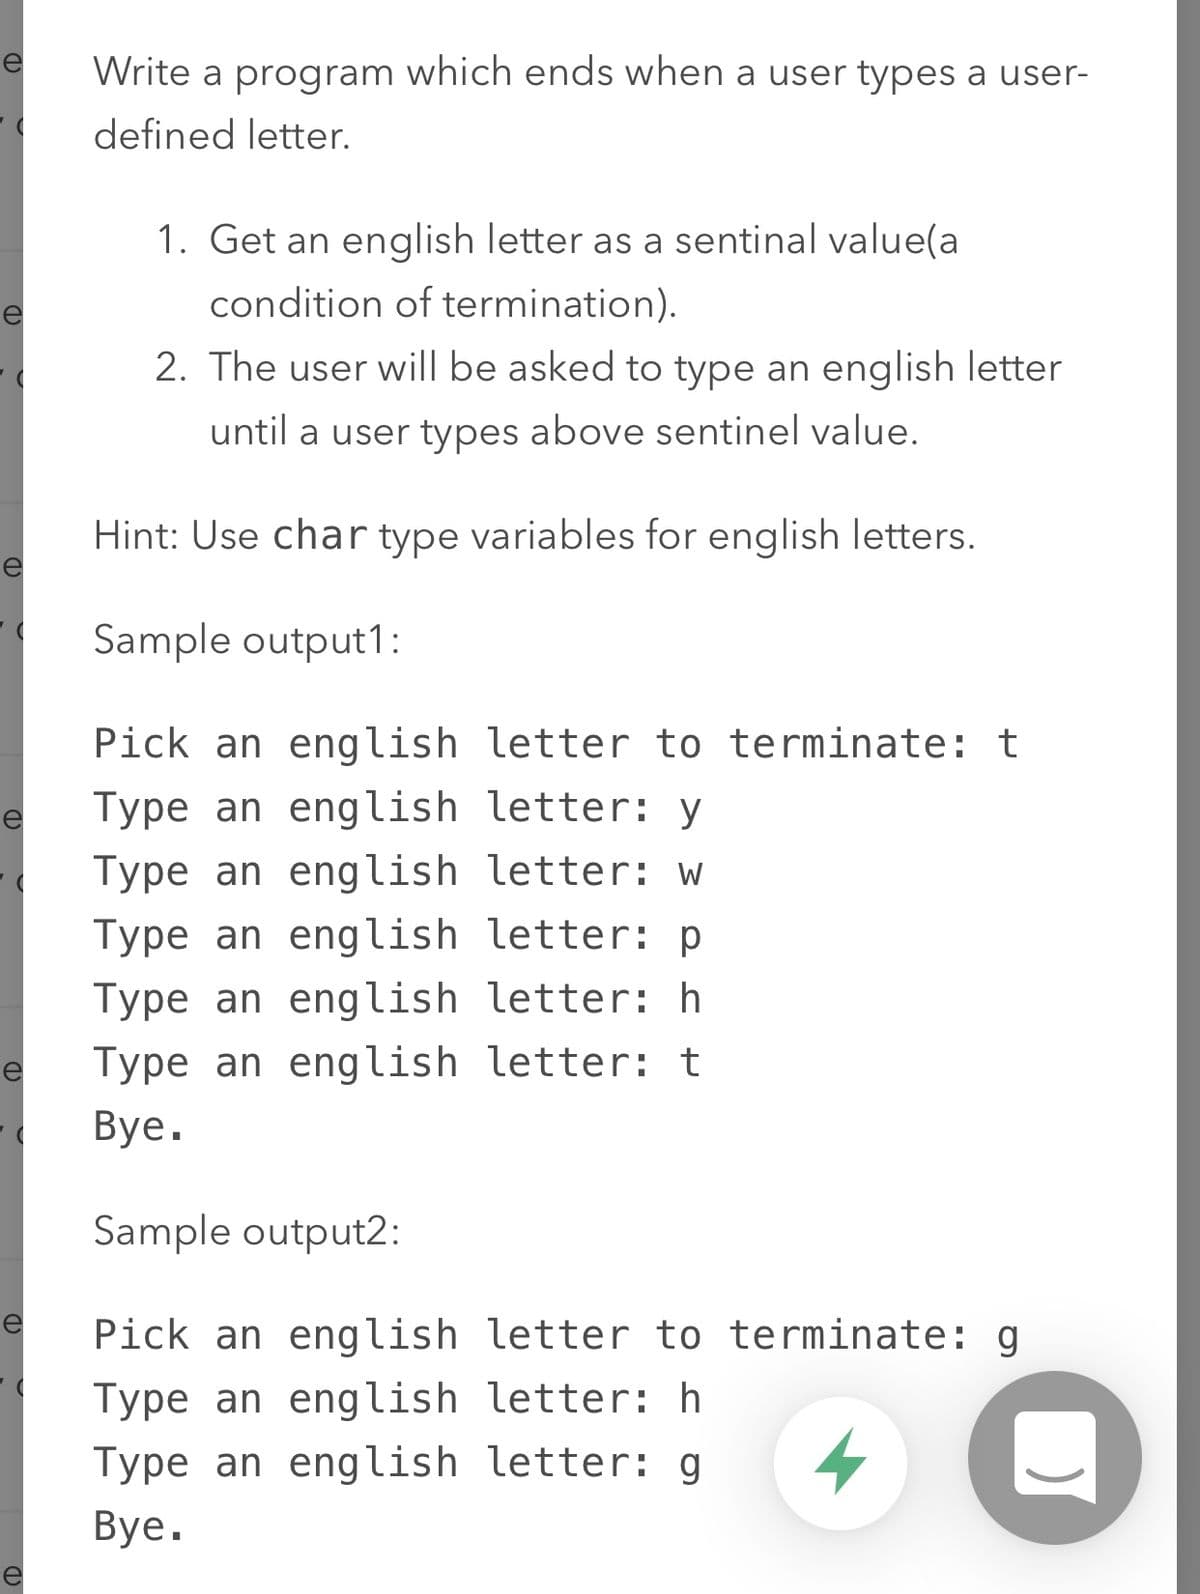 re
Write a program which ends when a user types a user-
defined letter.
1. Get an english letter as a sentinal value(a
condition of termination).
2. The user will be asked to type an english letter
until a user types above sentinel value.
Hint: Use char type variables for english letters.
e
Sample output1:
Pick an english letter to terminate: t
Type an english letter: y
Type an english letter: w
Type an english letter: p
Type an english letter: h
Type an english letter: t
Вye.
Sample output2:
e
Pick an english letter to terminate: g
Type an english letter: h
Type an english letter: g
Вye.
